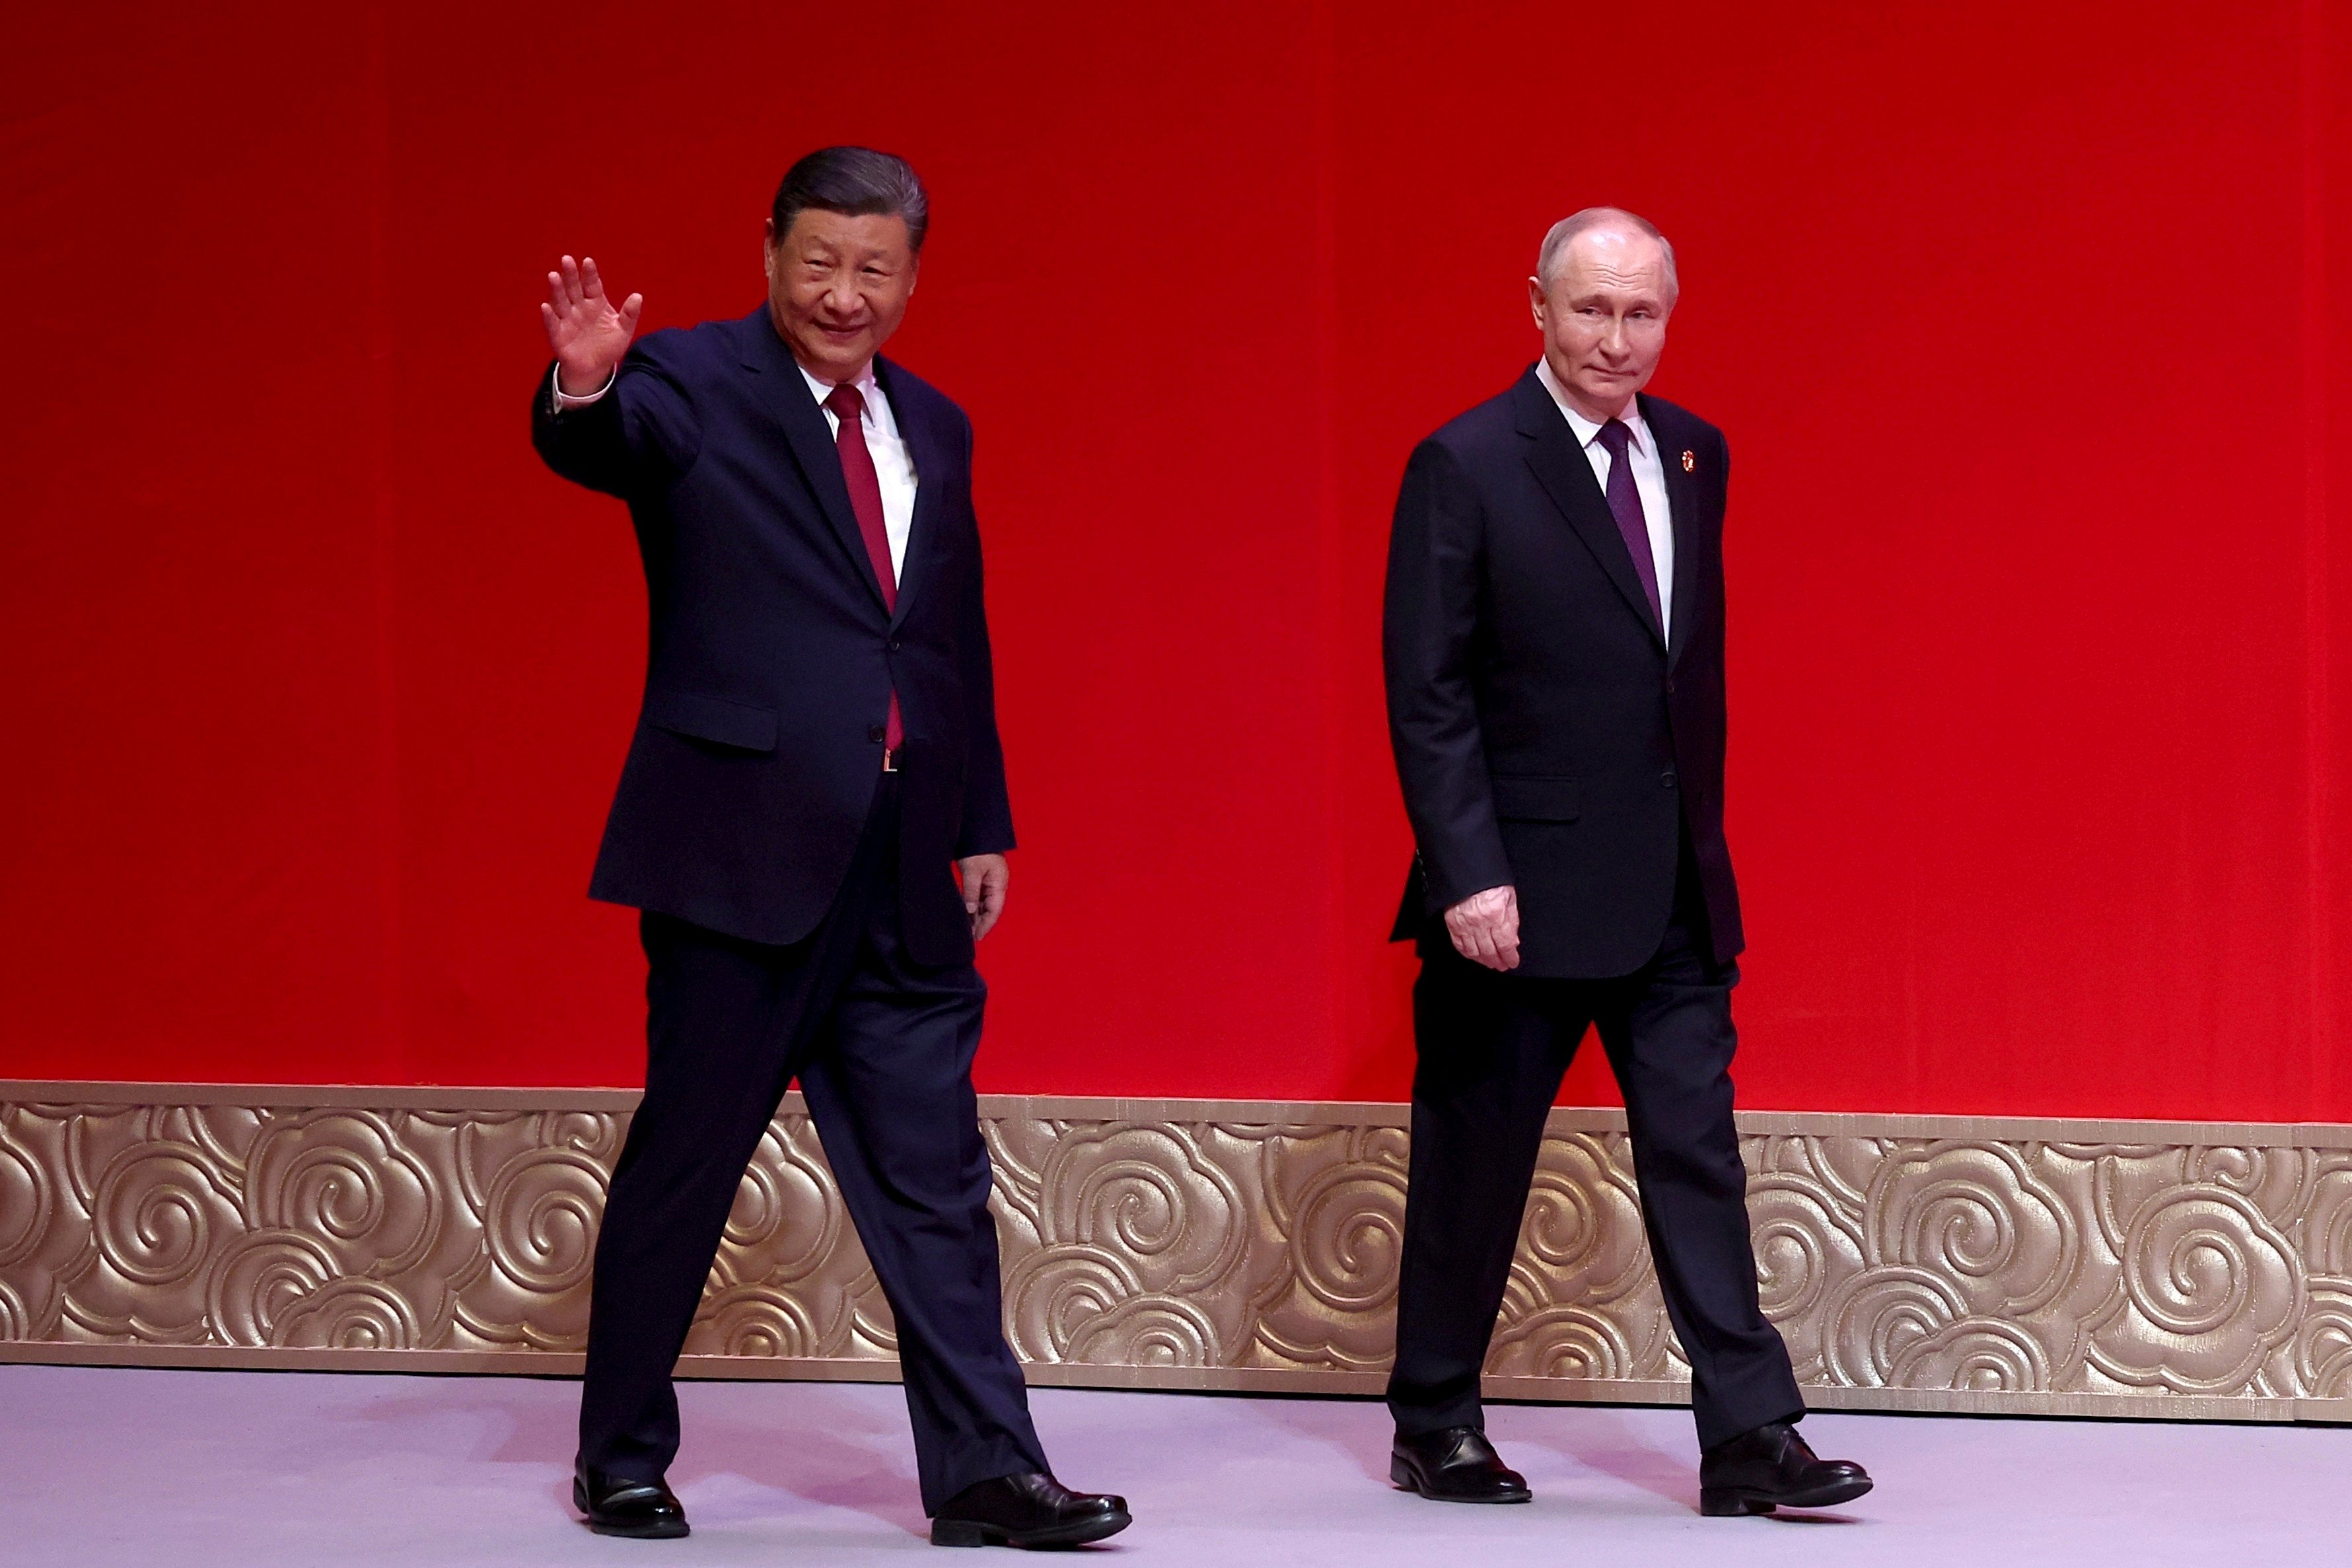 Russian President Vladimir Putin (right) and Chinese President Xi Jinping leave a concert at the National Centre for the Performing Arts in Beijing on Thursday. Photo: AP